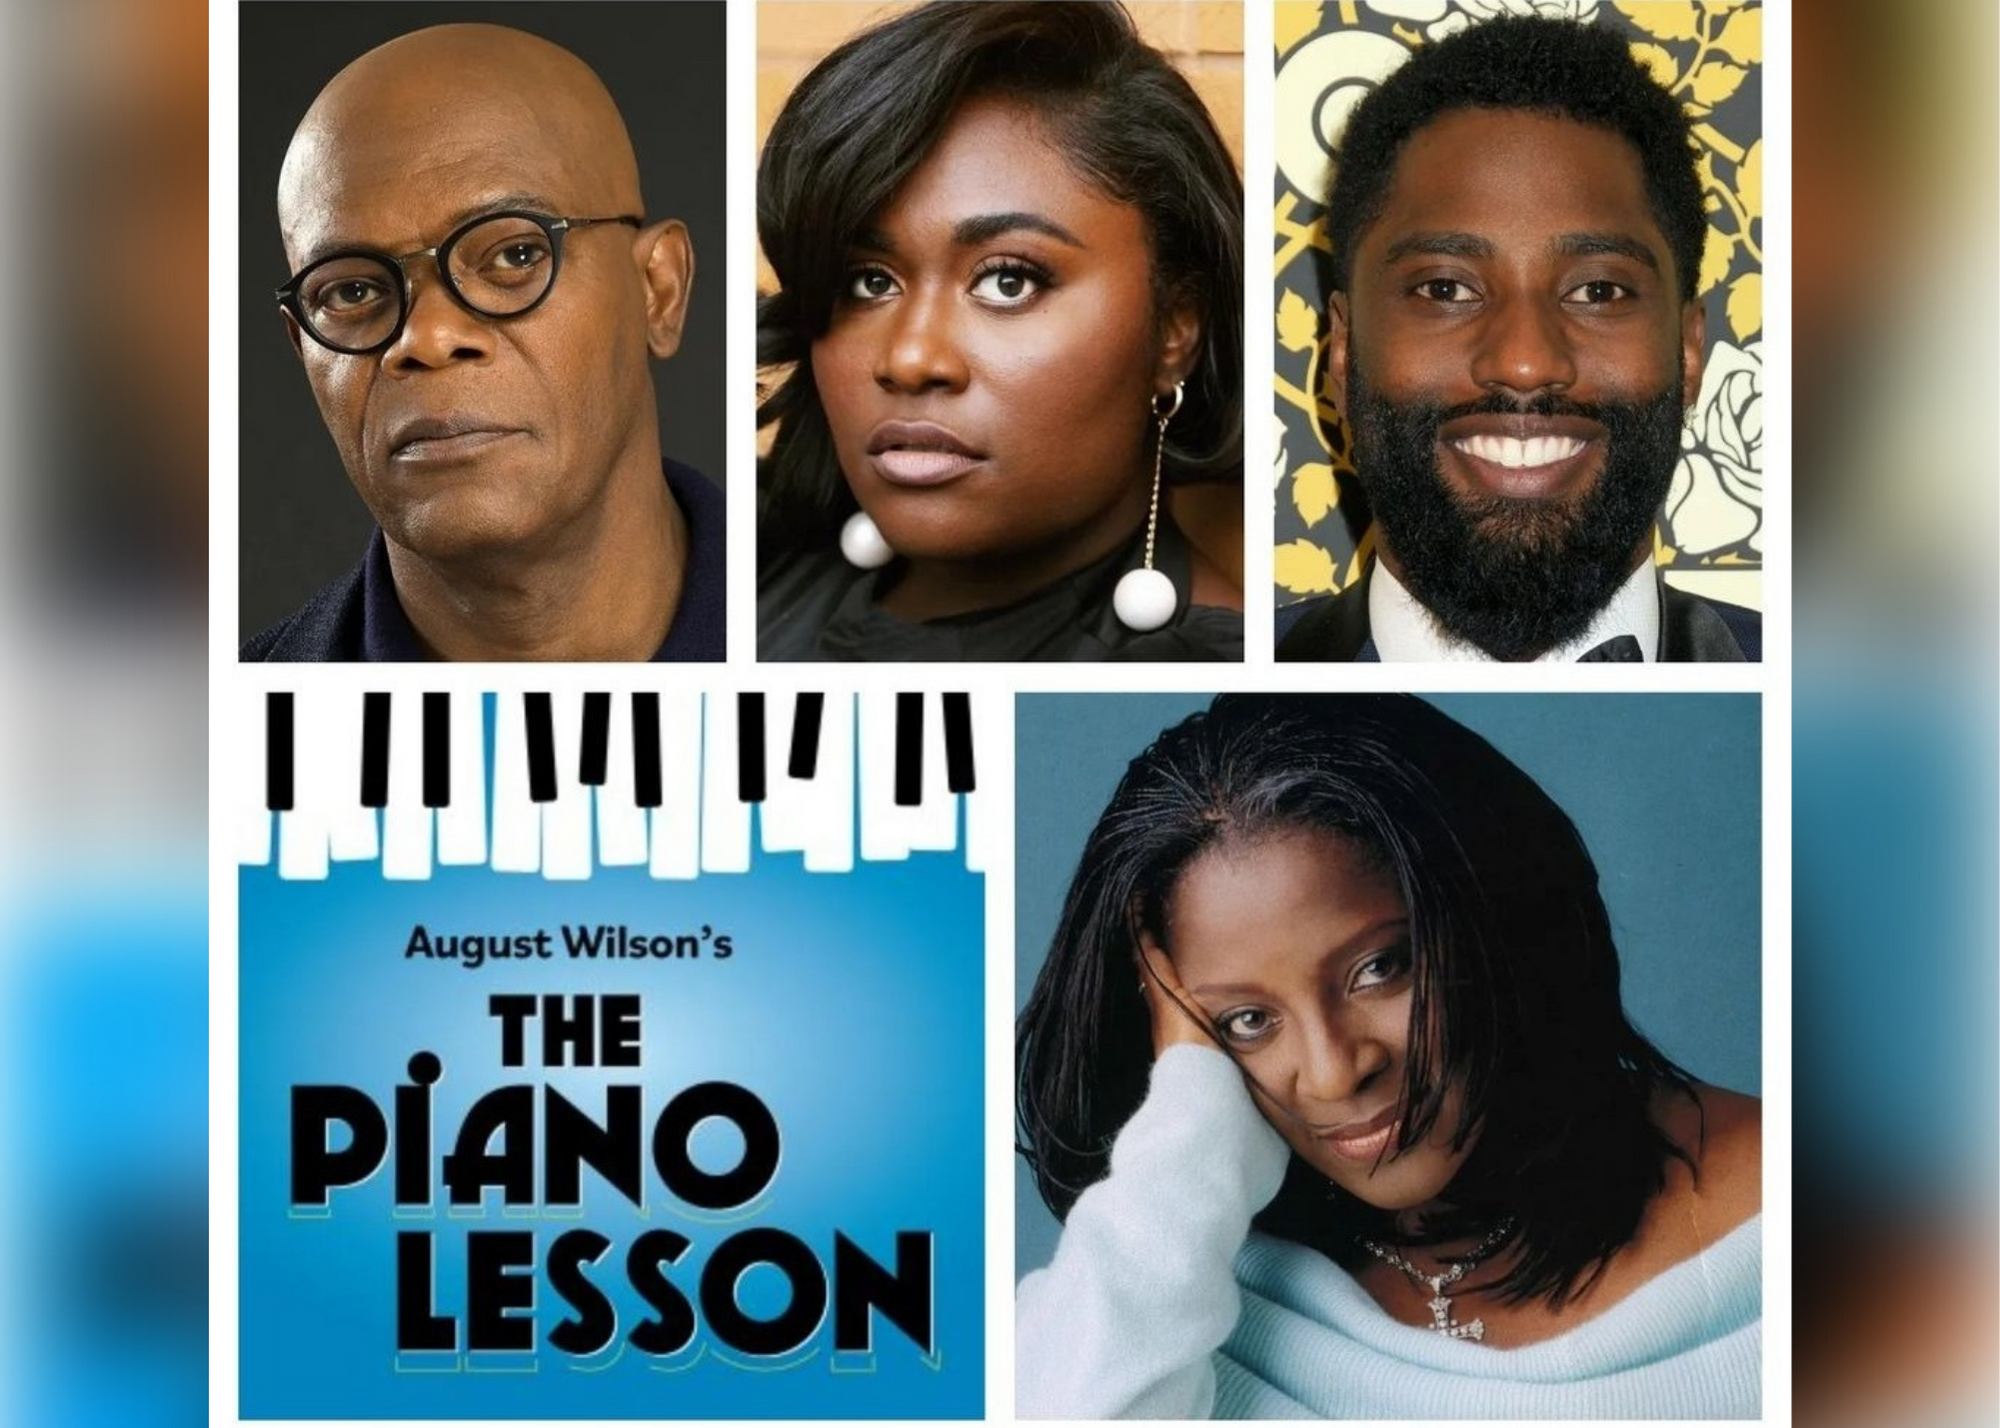 Samuel L. Jackson And Others Star in Broadway Play Directed By His Wife LaTanya Richardson Jackson